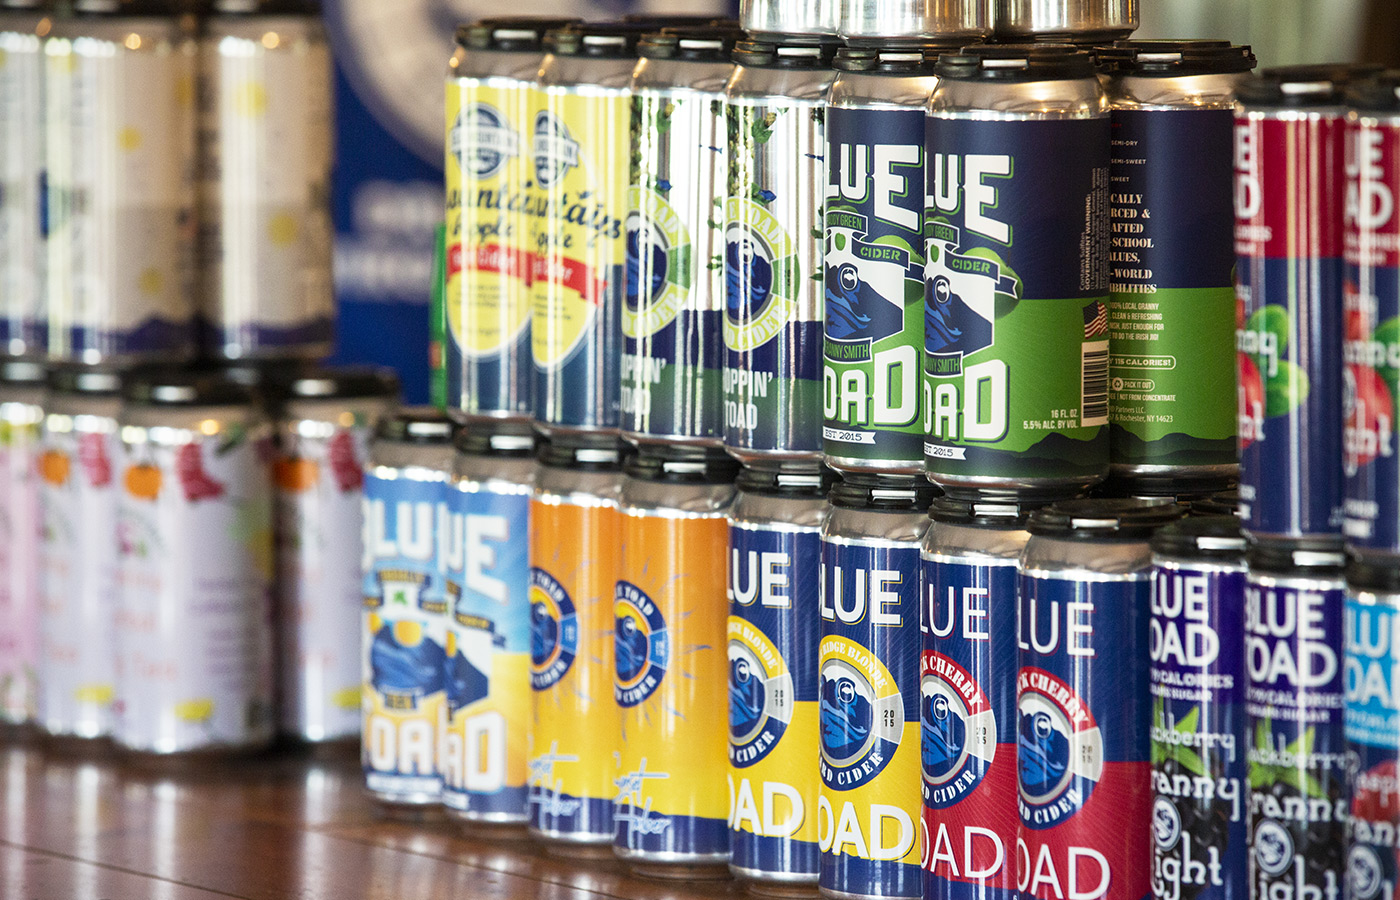 Blue-Toad-Hard-Cider in cans